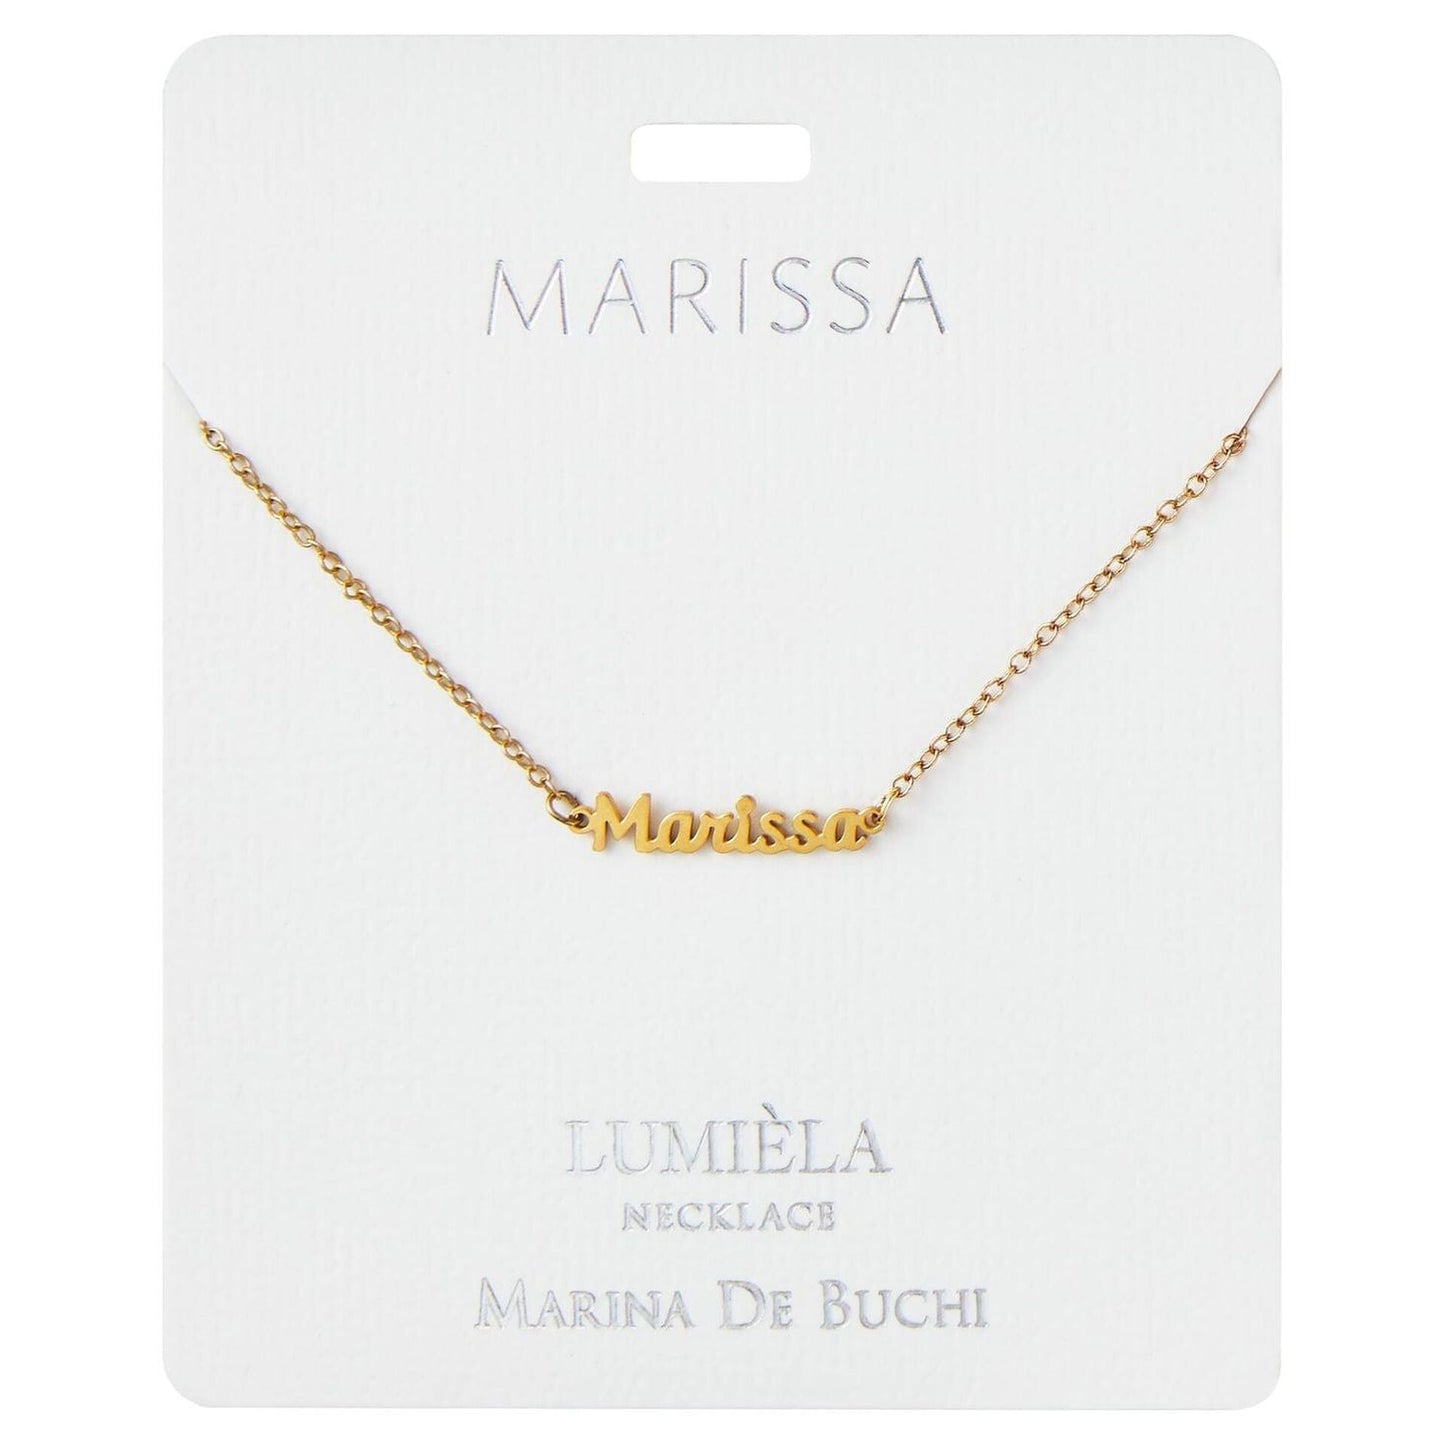 Lumiela Personalized Nameplate Crystal Necklace in Gold Tone